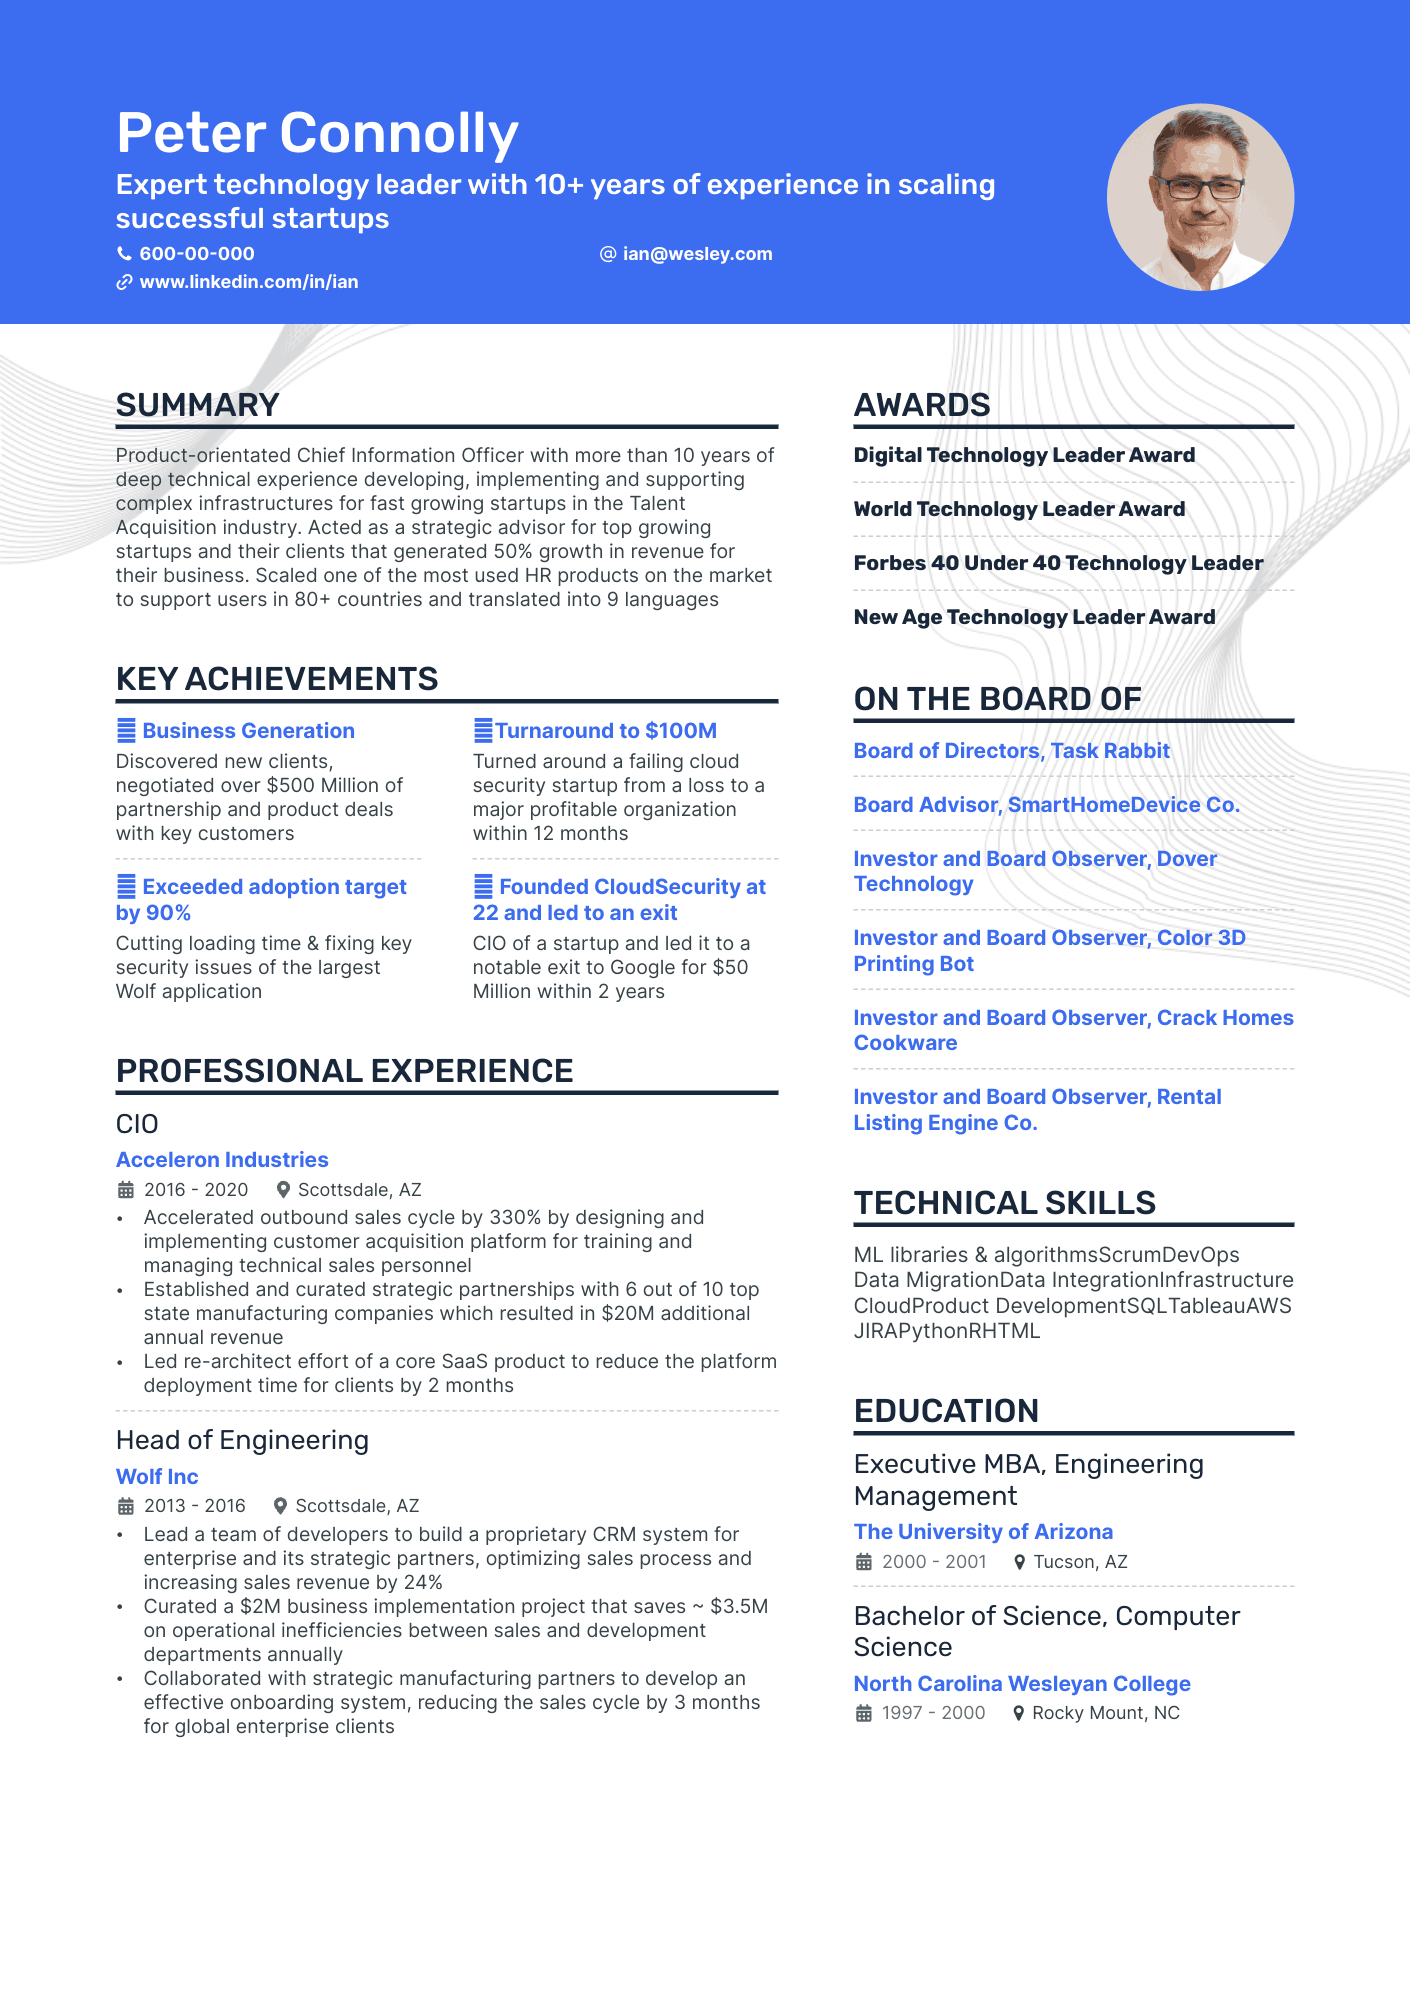 Expert technology leader with 10+ years of experience in scaling successful startups resume example